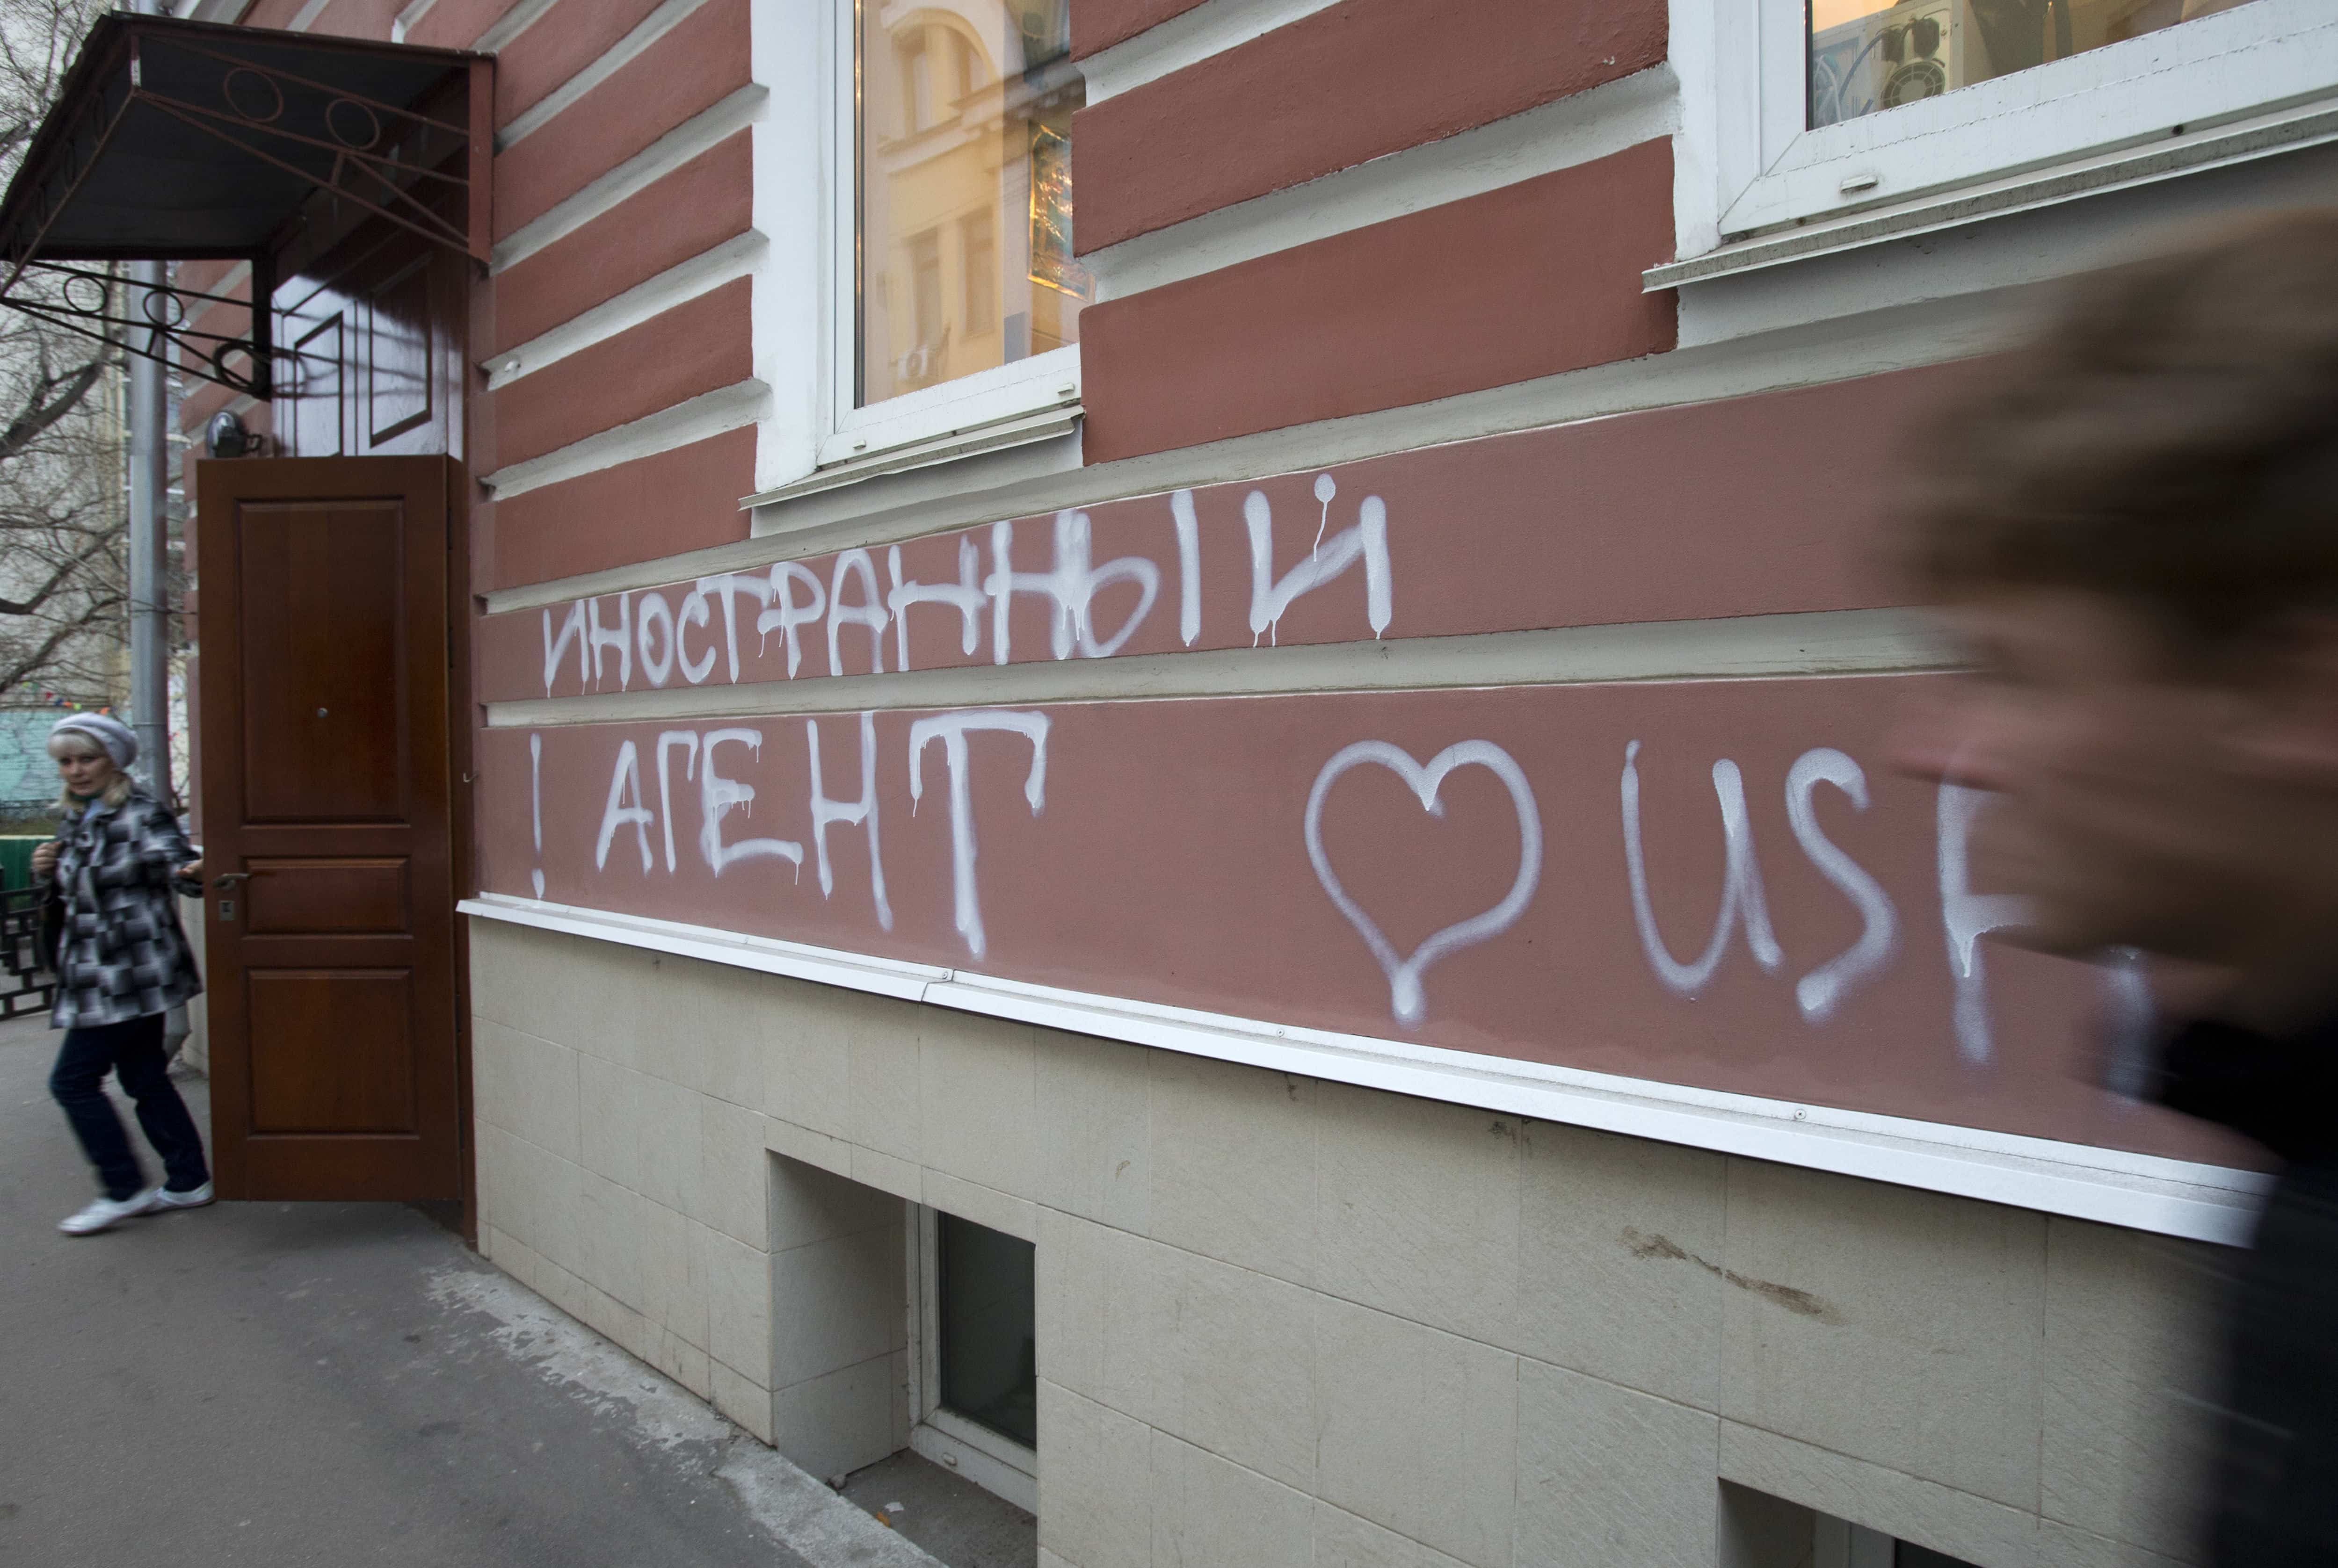 A man passes by the office of Memorial rights group in Moscow, on 21 November 2012. The building has the words “Foreign Agent (Loves) USA” spray-painted on its facade by unidentified people, AP Photo/Misha Japaridze